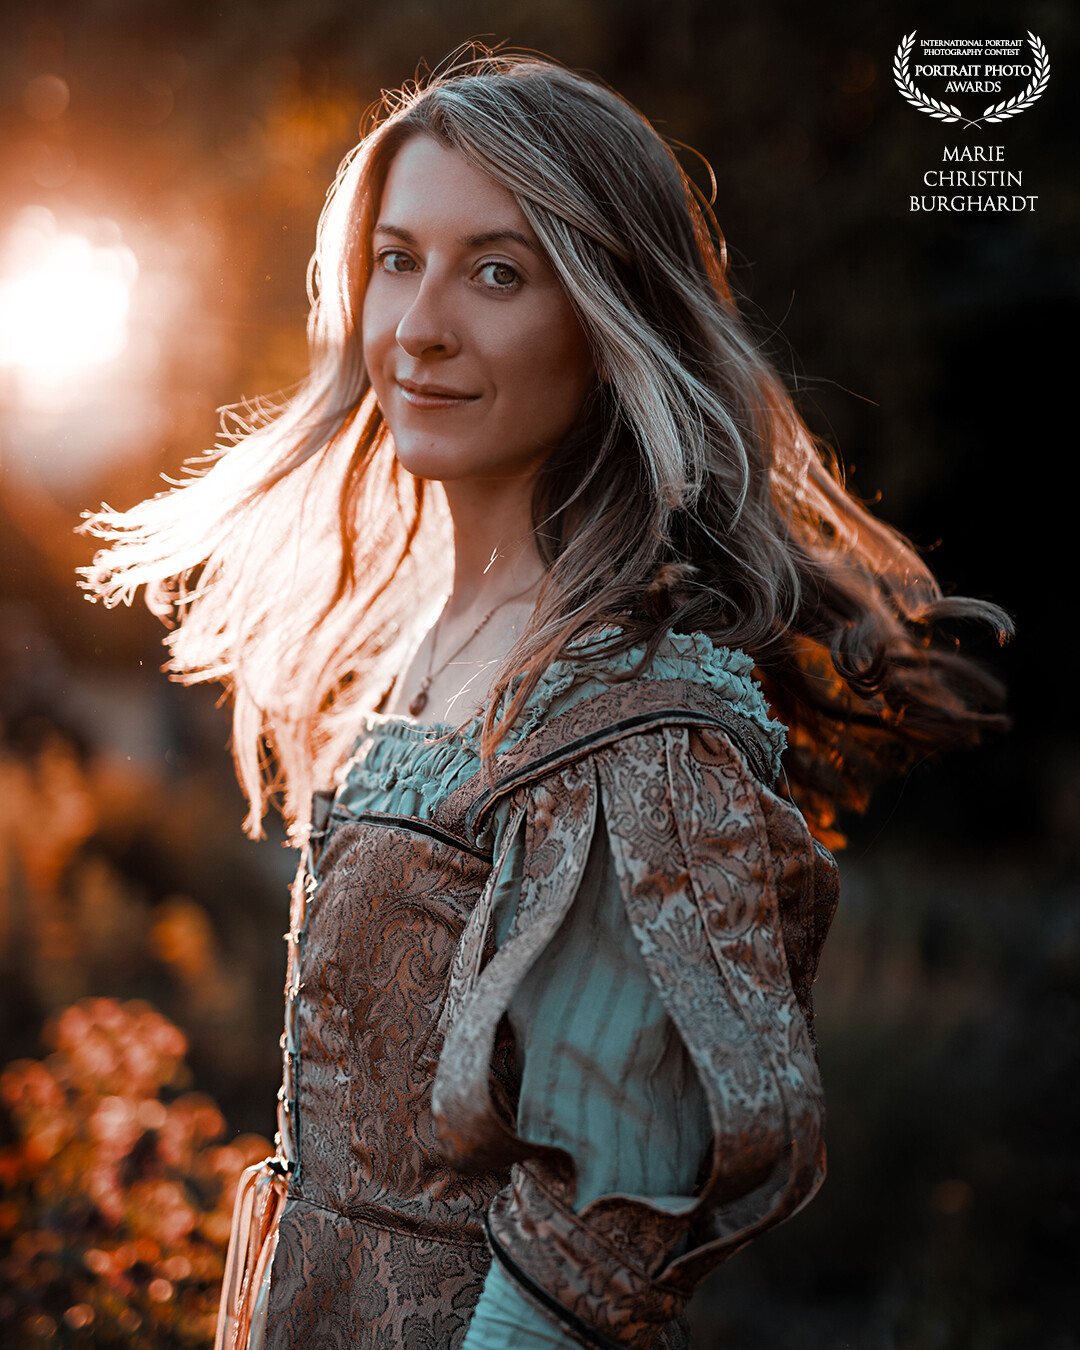 I took this portrait of my friend Bina, a wonderful musician and singer, one year ago when we met at Elbenwald Festival in Germany. We had a perfect sunset and she wore a self made medieval costume. It was a perfect combination. I'm still in love with this photo!<br />
<br />
Model: @binabianca8